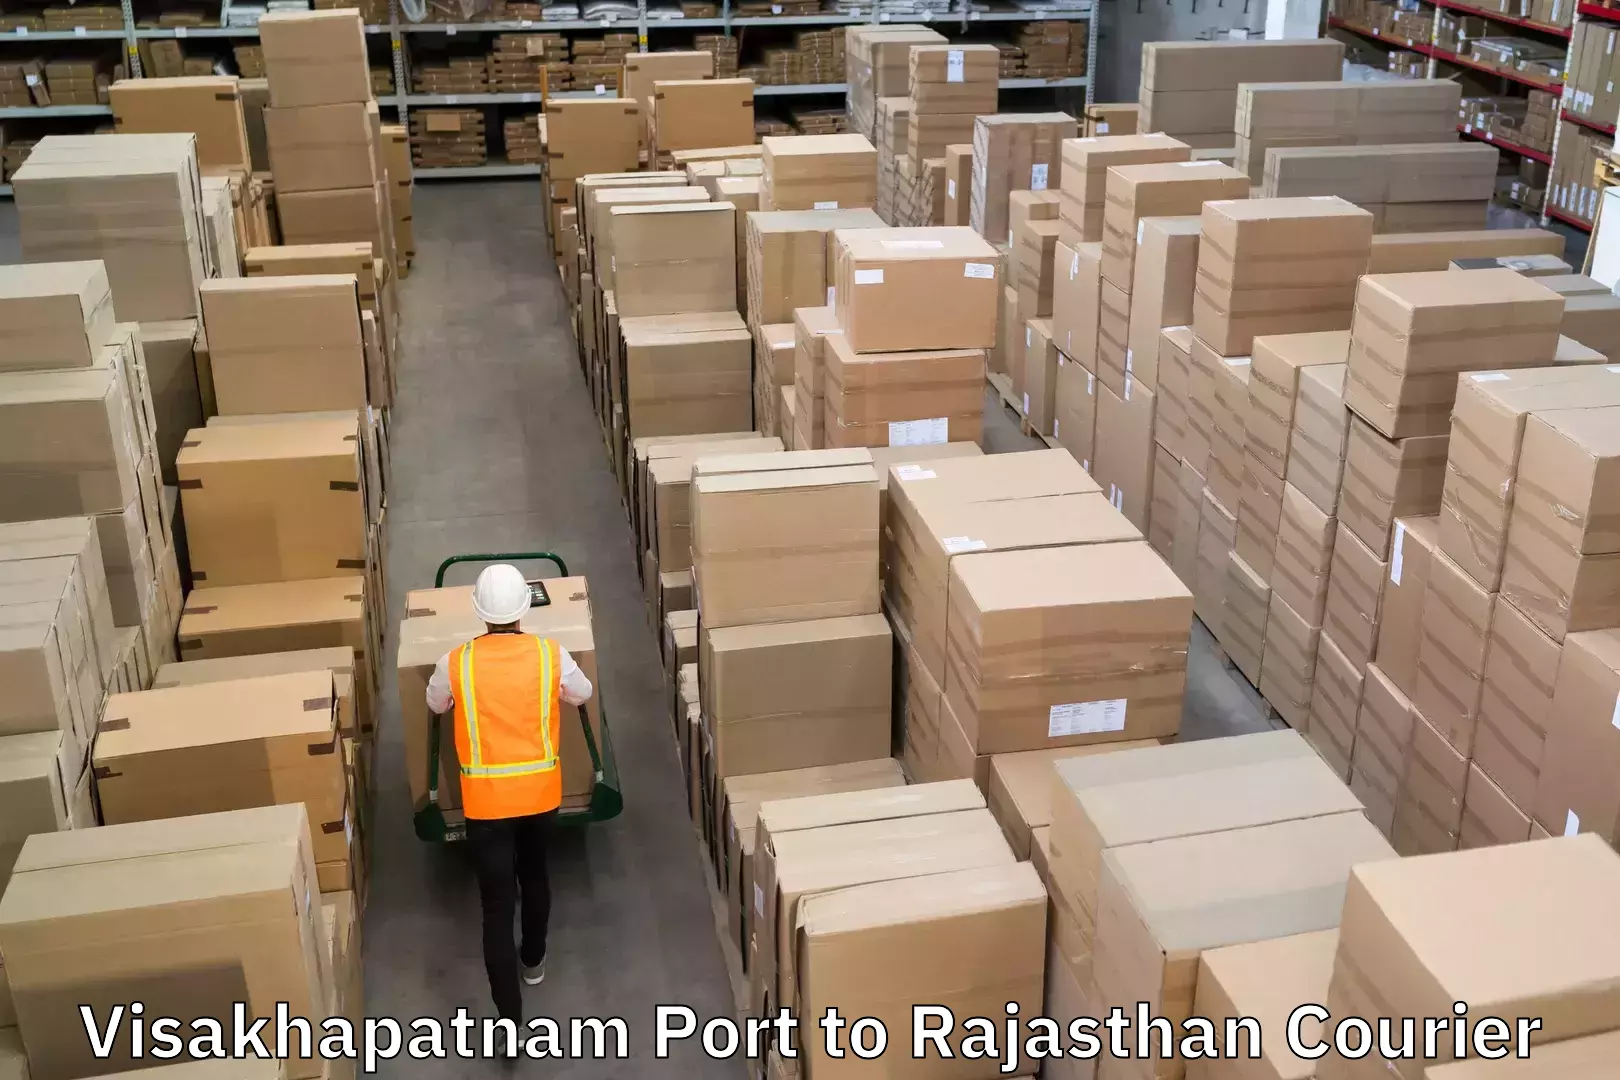 Express delivery capabilities Visakhapatnam Port to Rajasthan